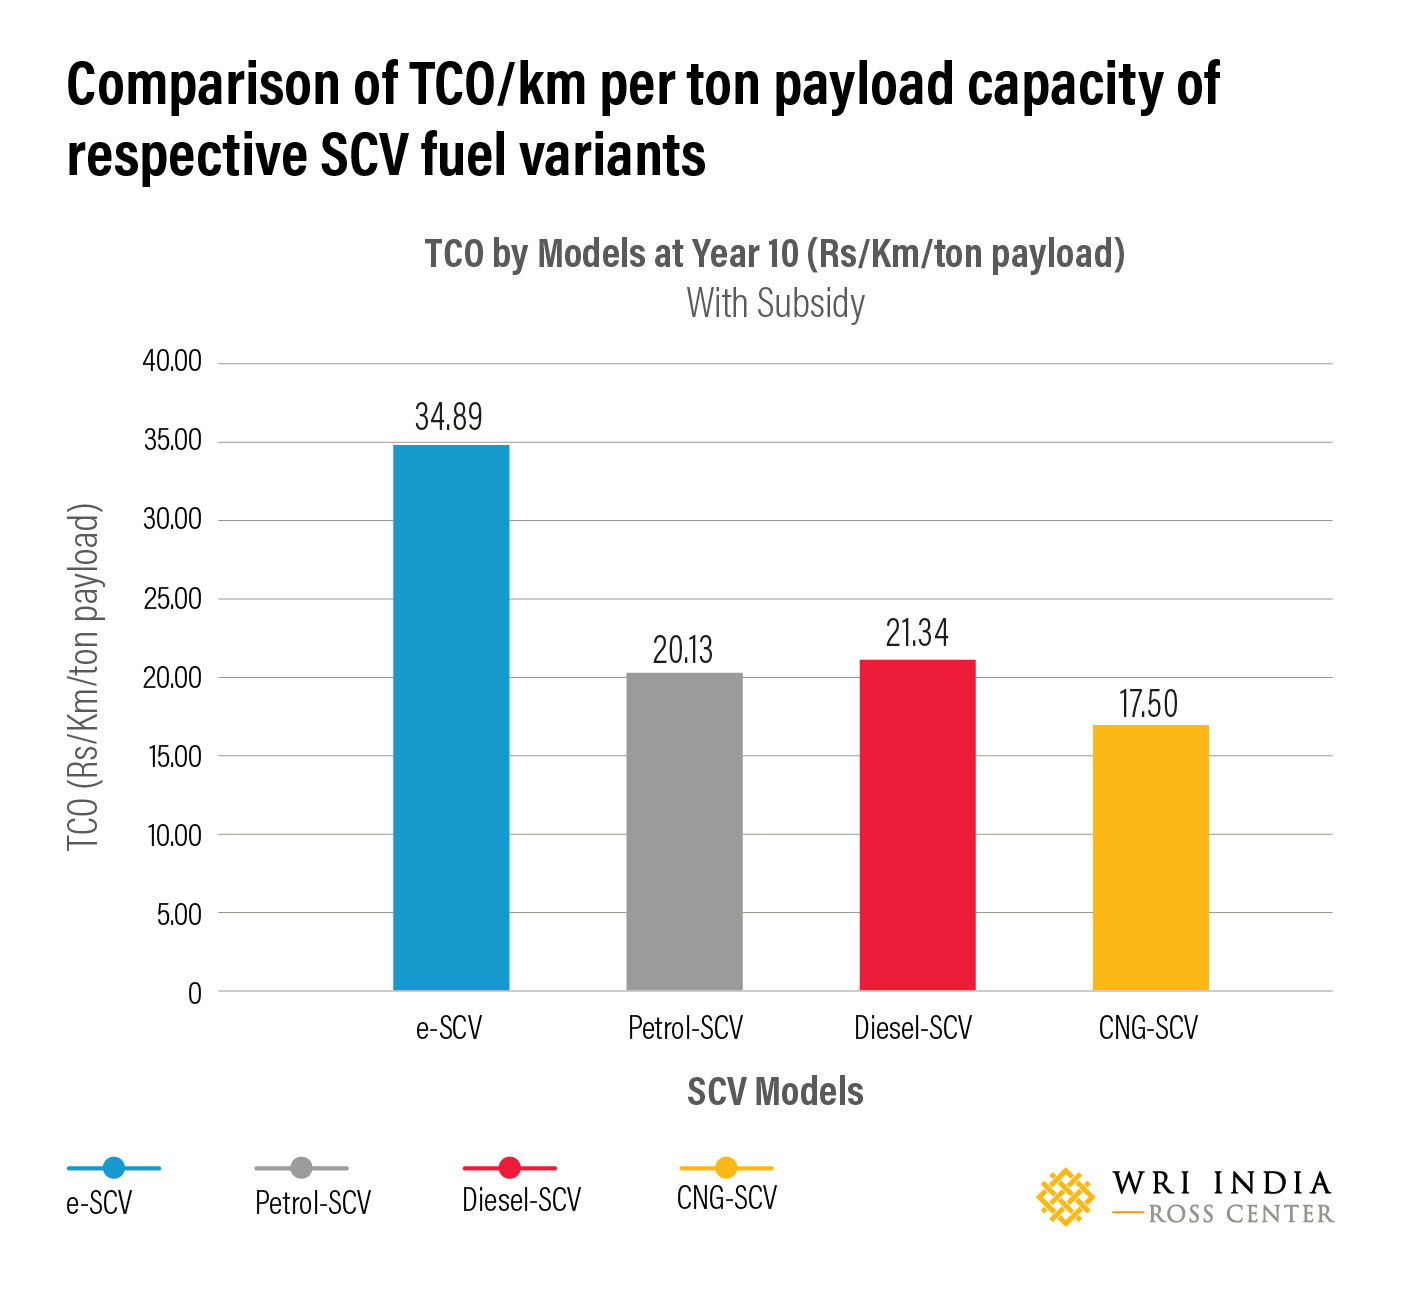 Comparison of TCO/km per ton payload capacity of respective SCV fuel variants.